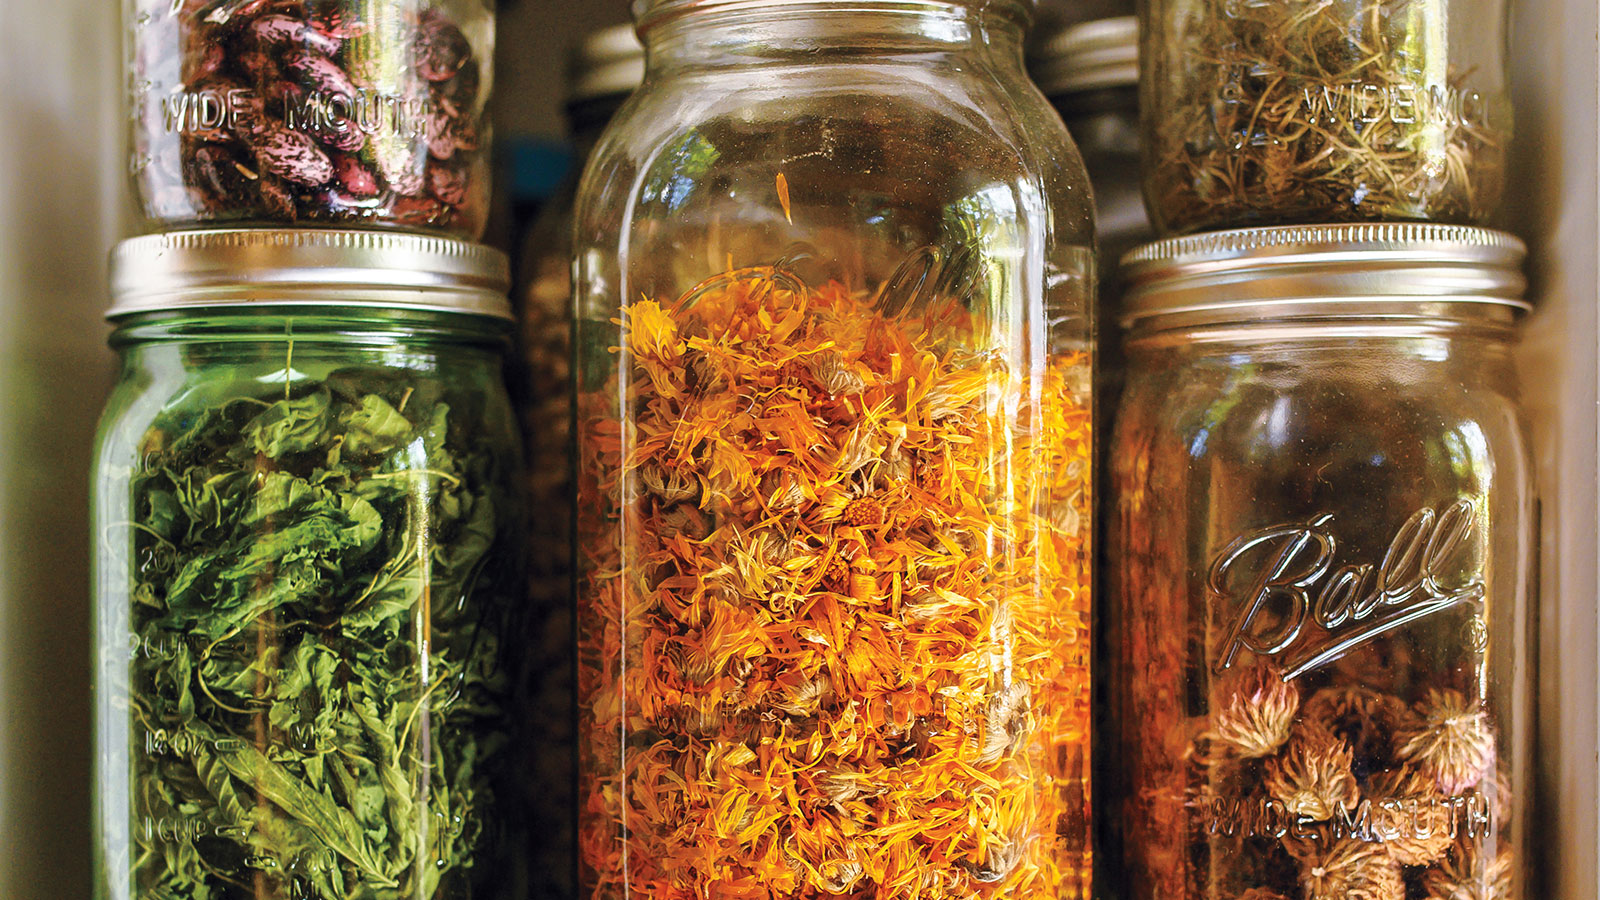 Fan, Oven or Dehydrator? The Best Ways to Dry and Store Magic